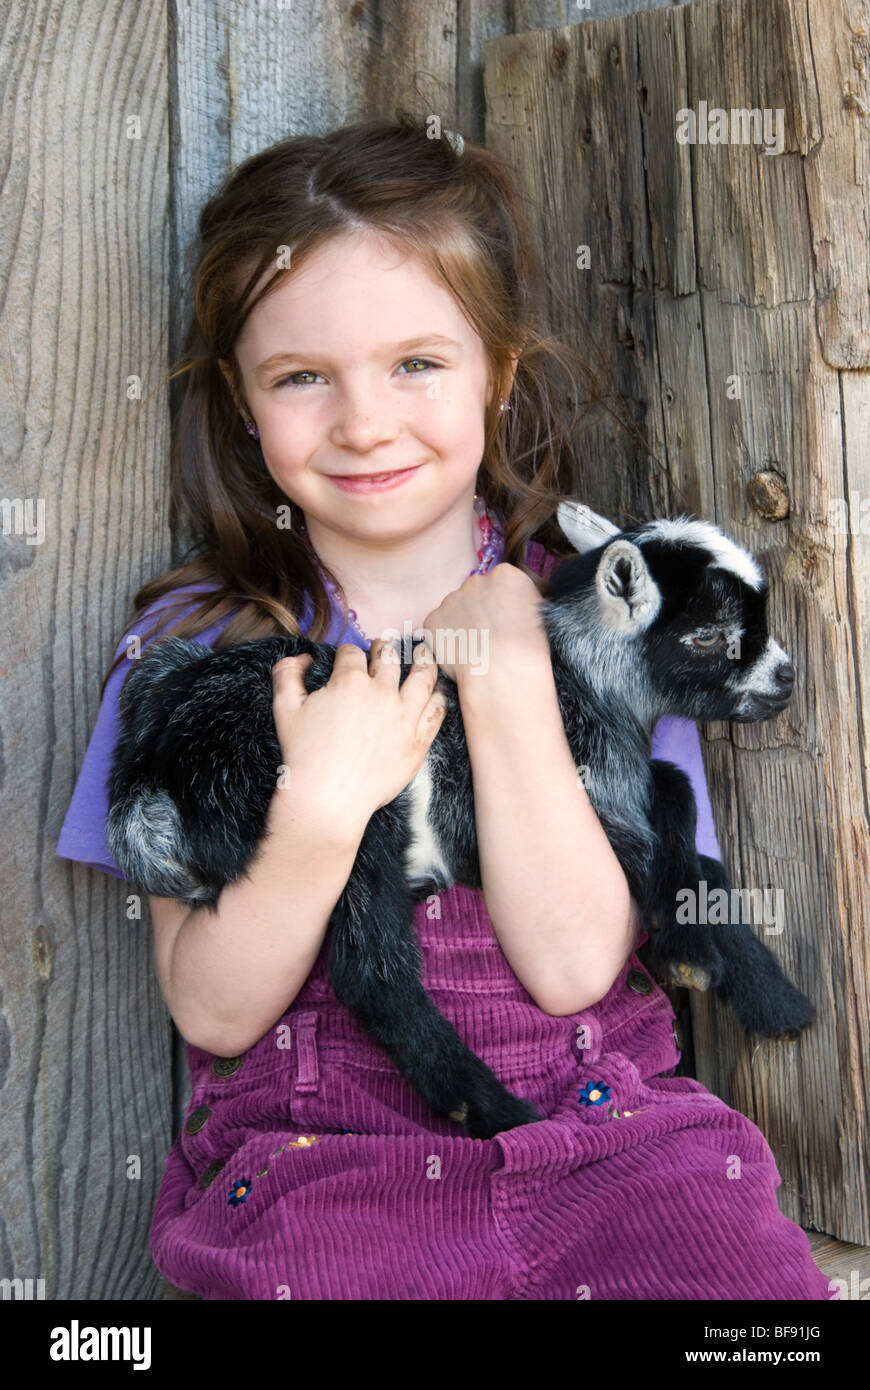 Cute young farm girl holding a newborn baby goat. Stock Photo